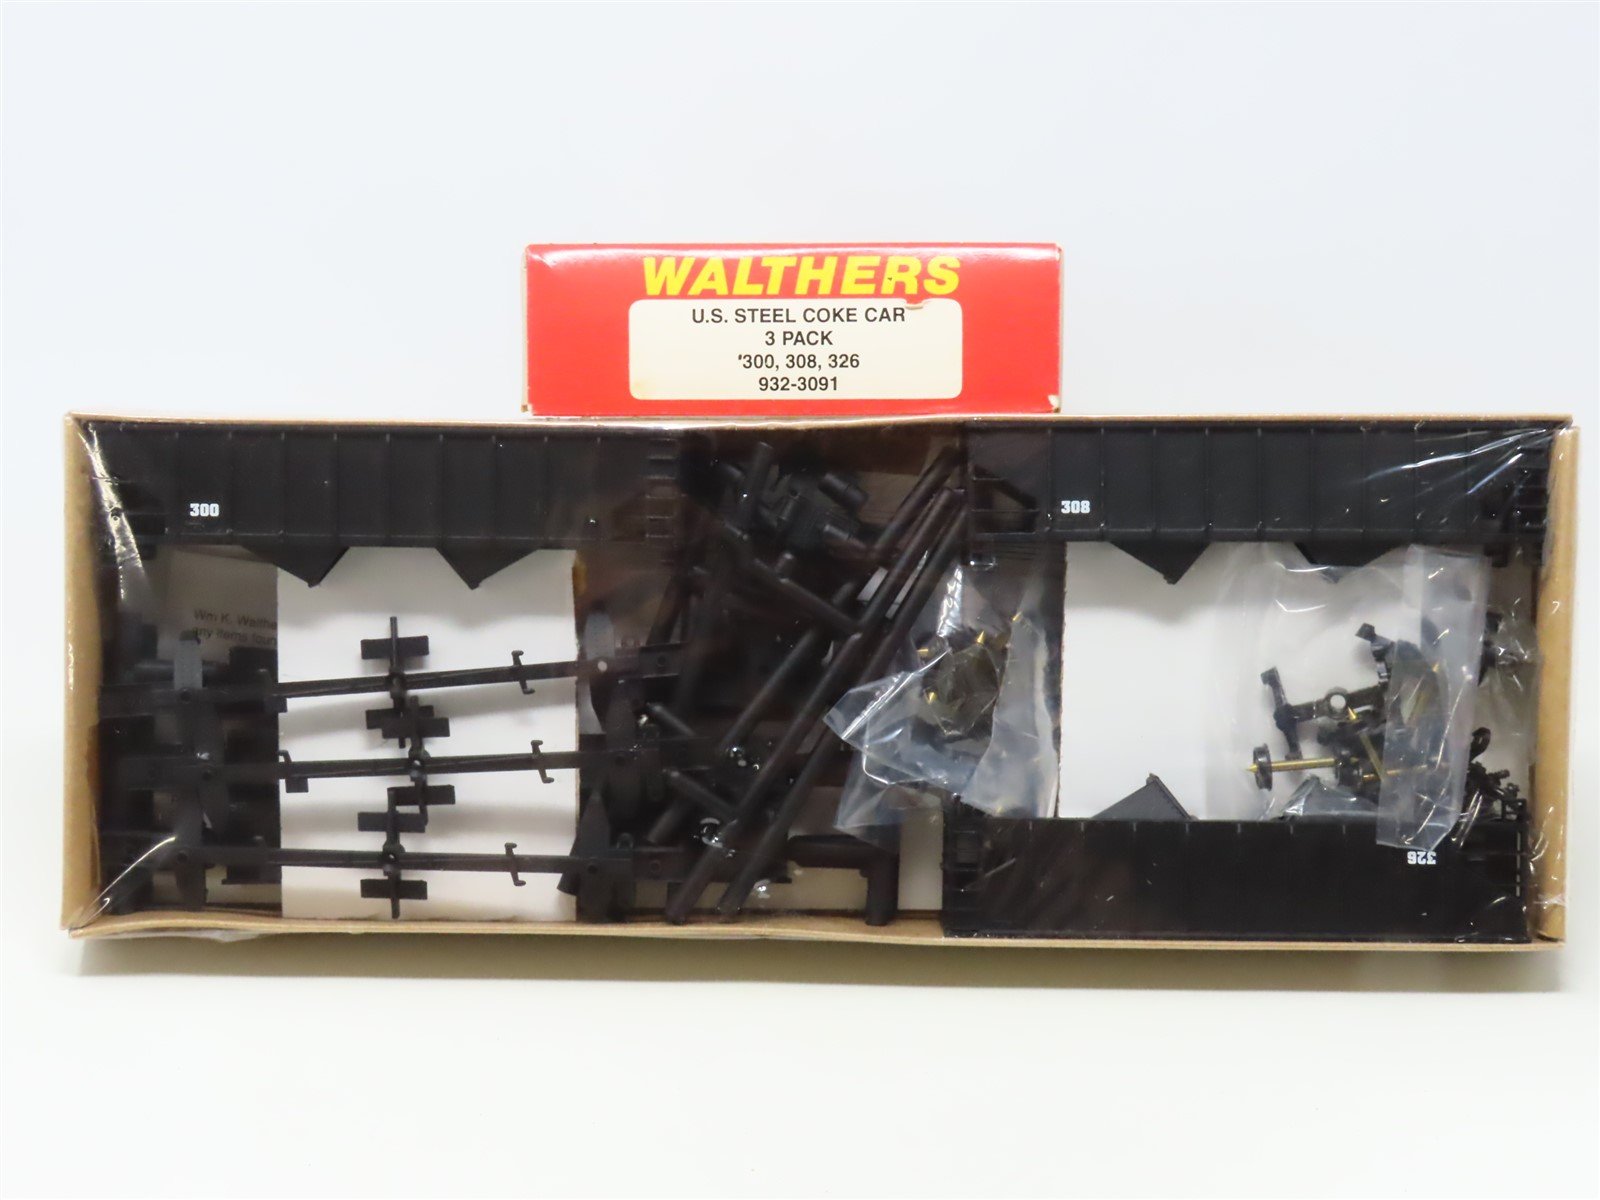 HO Scale Walthers 932-3091 US Steel Coke Car #300 #308 #326 Kit 3-Pack SEALED